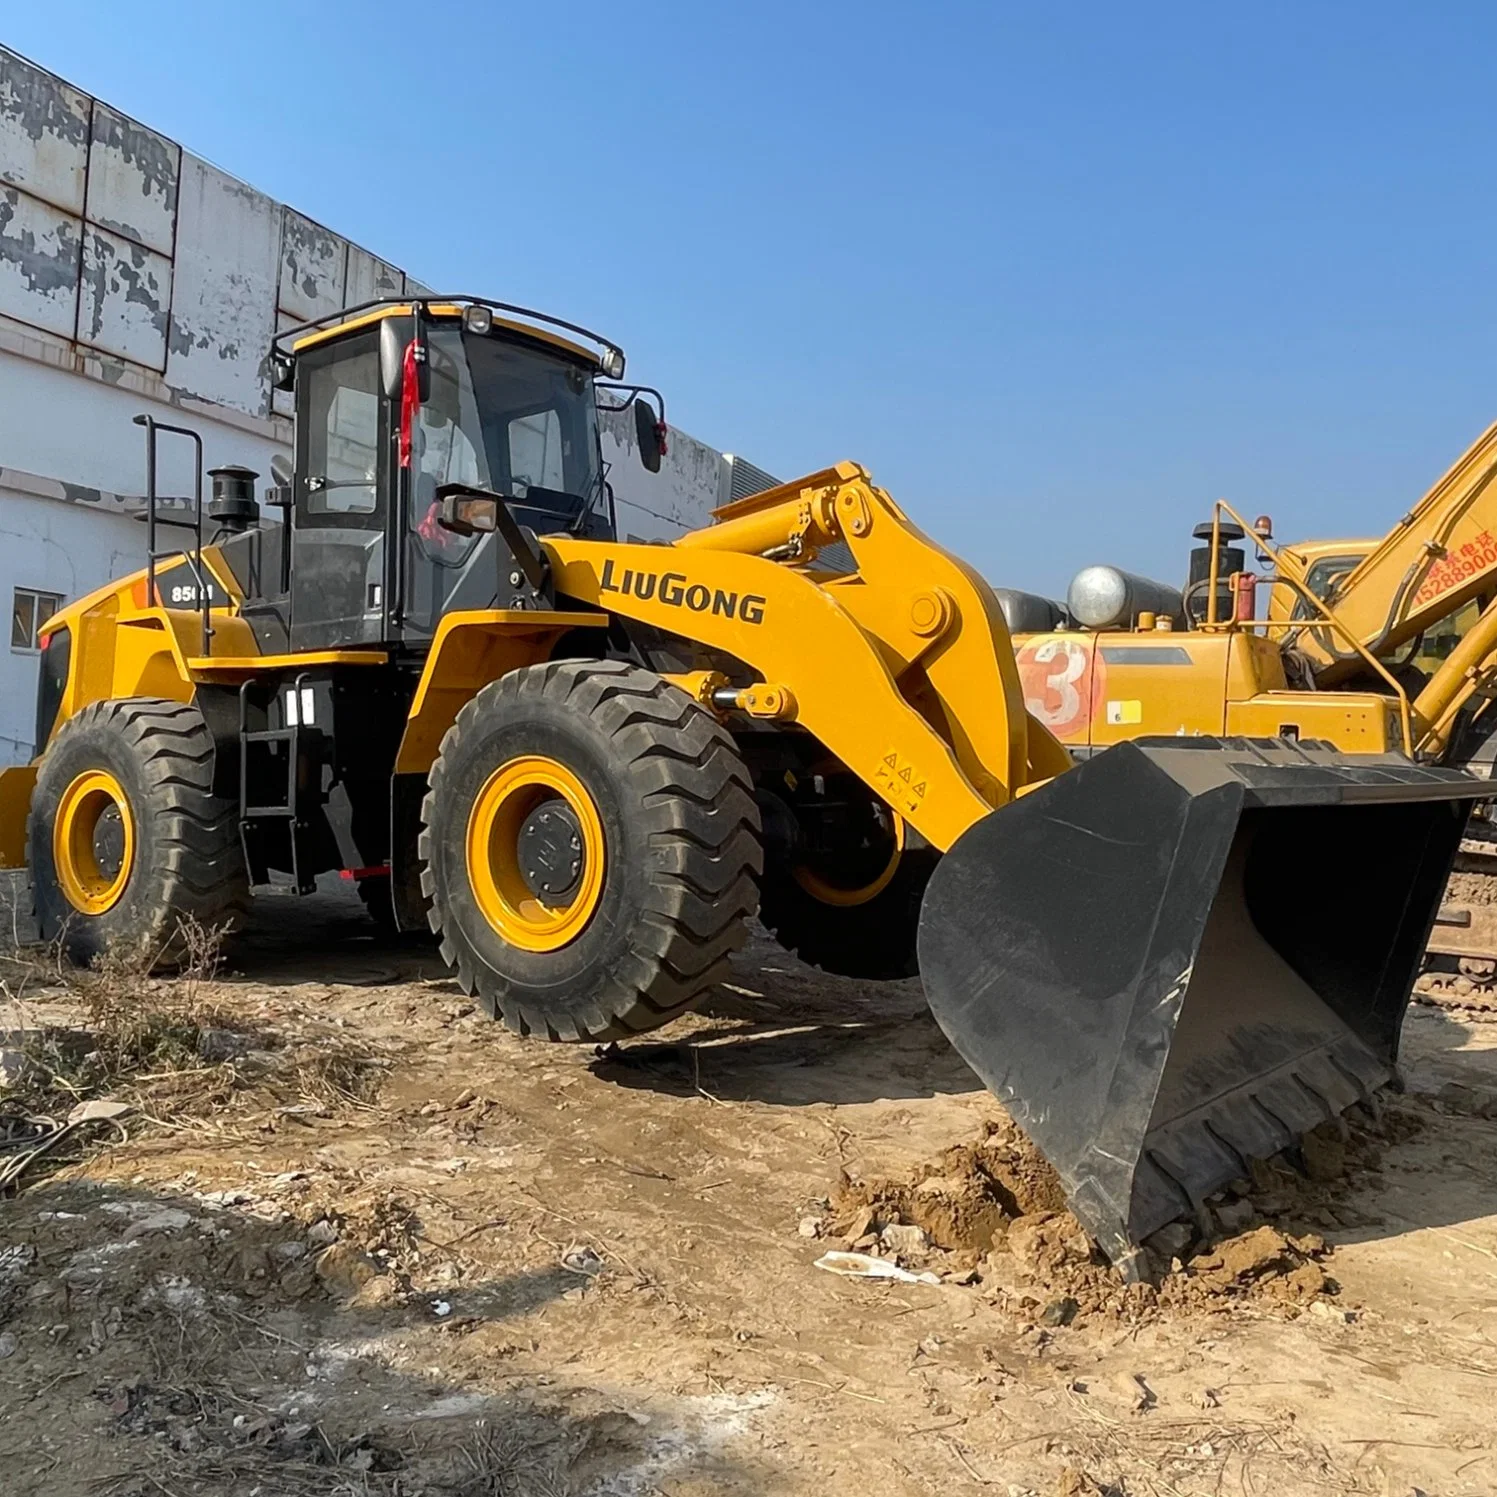 Chinese Top Brand Liugong Wheel Loader 856h Series Used Construction Machinery Front End Loader 856 856h Clg856 Cat 966h 966 LG956 956 in Stock for Sale